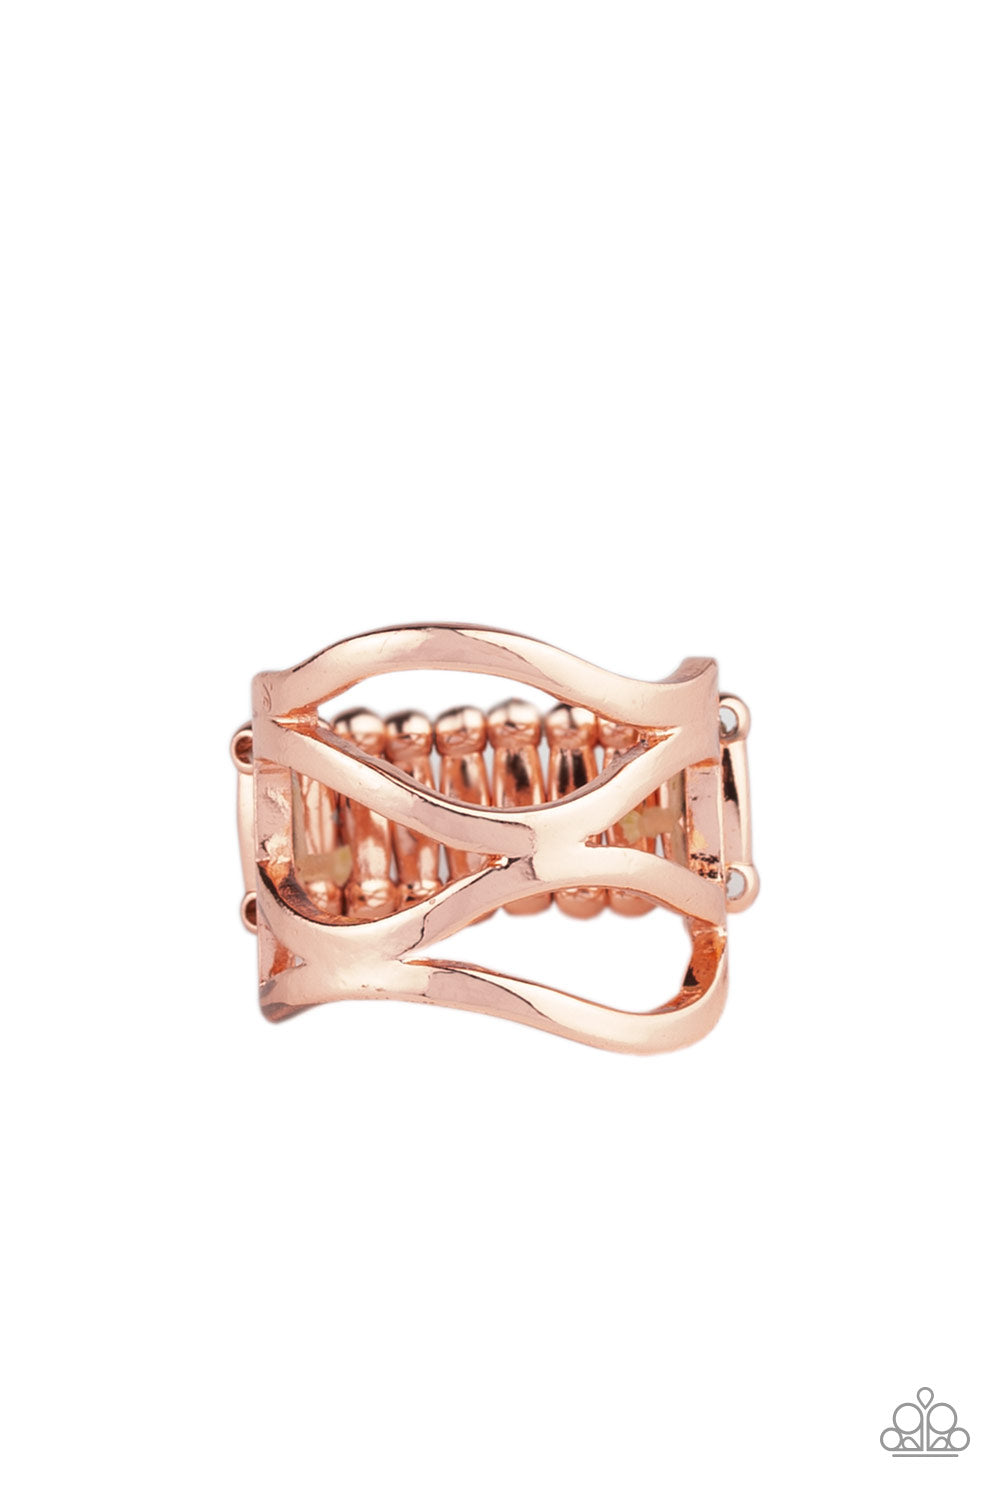 All Over The Place - Copper Ring - Princess Glam Shop